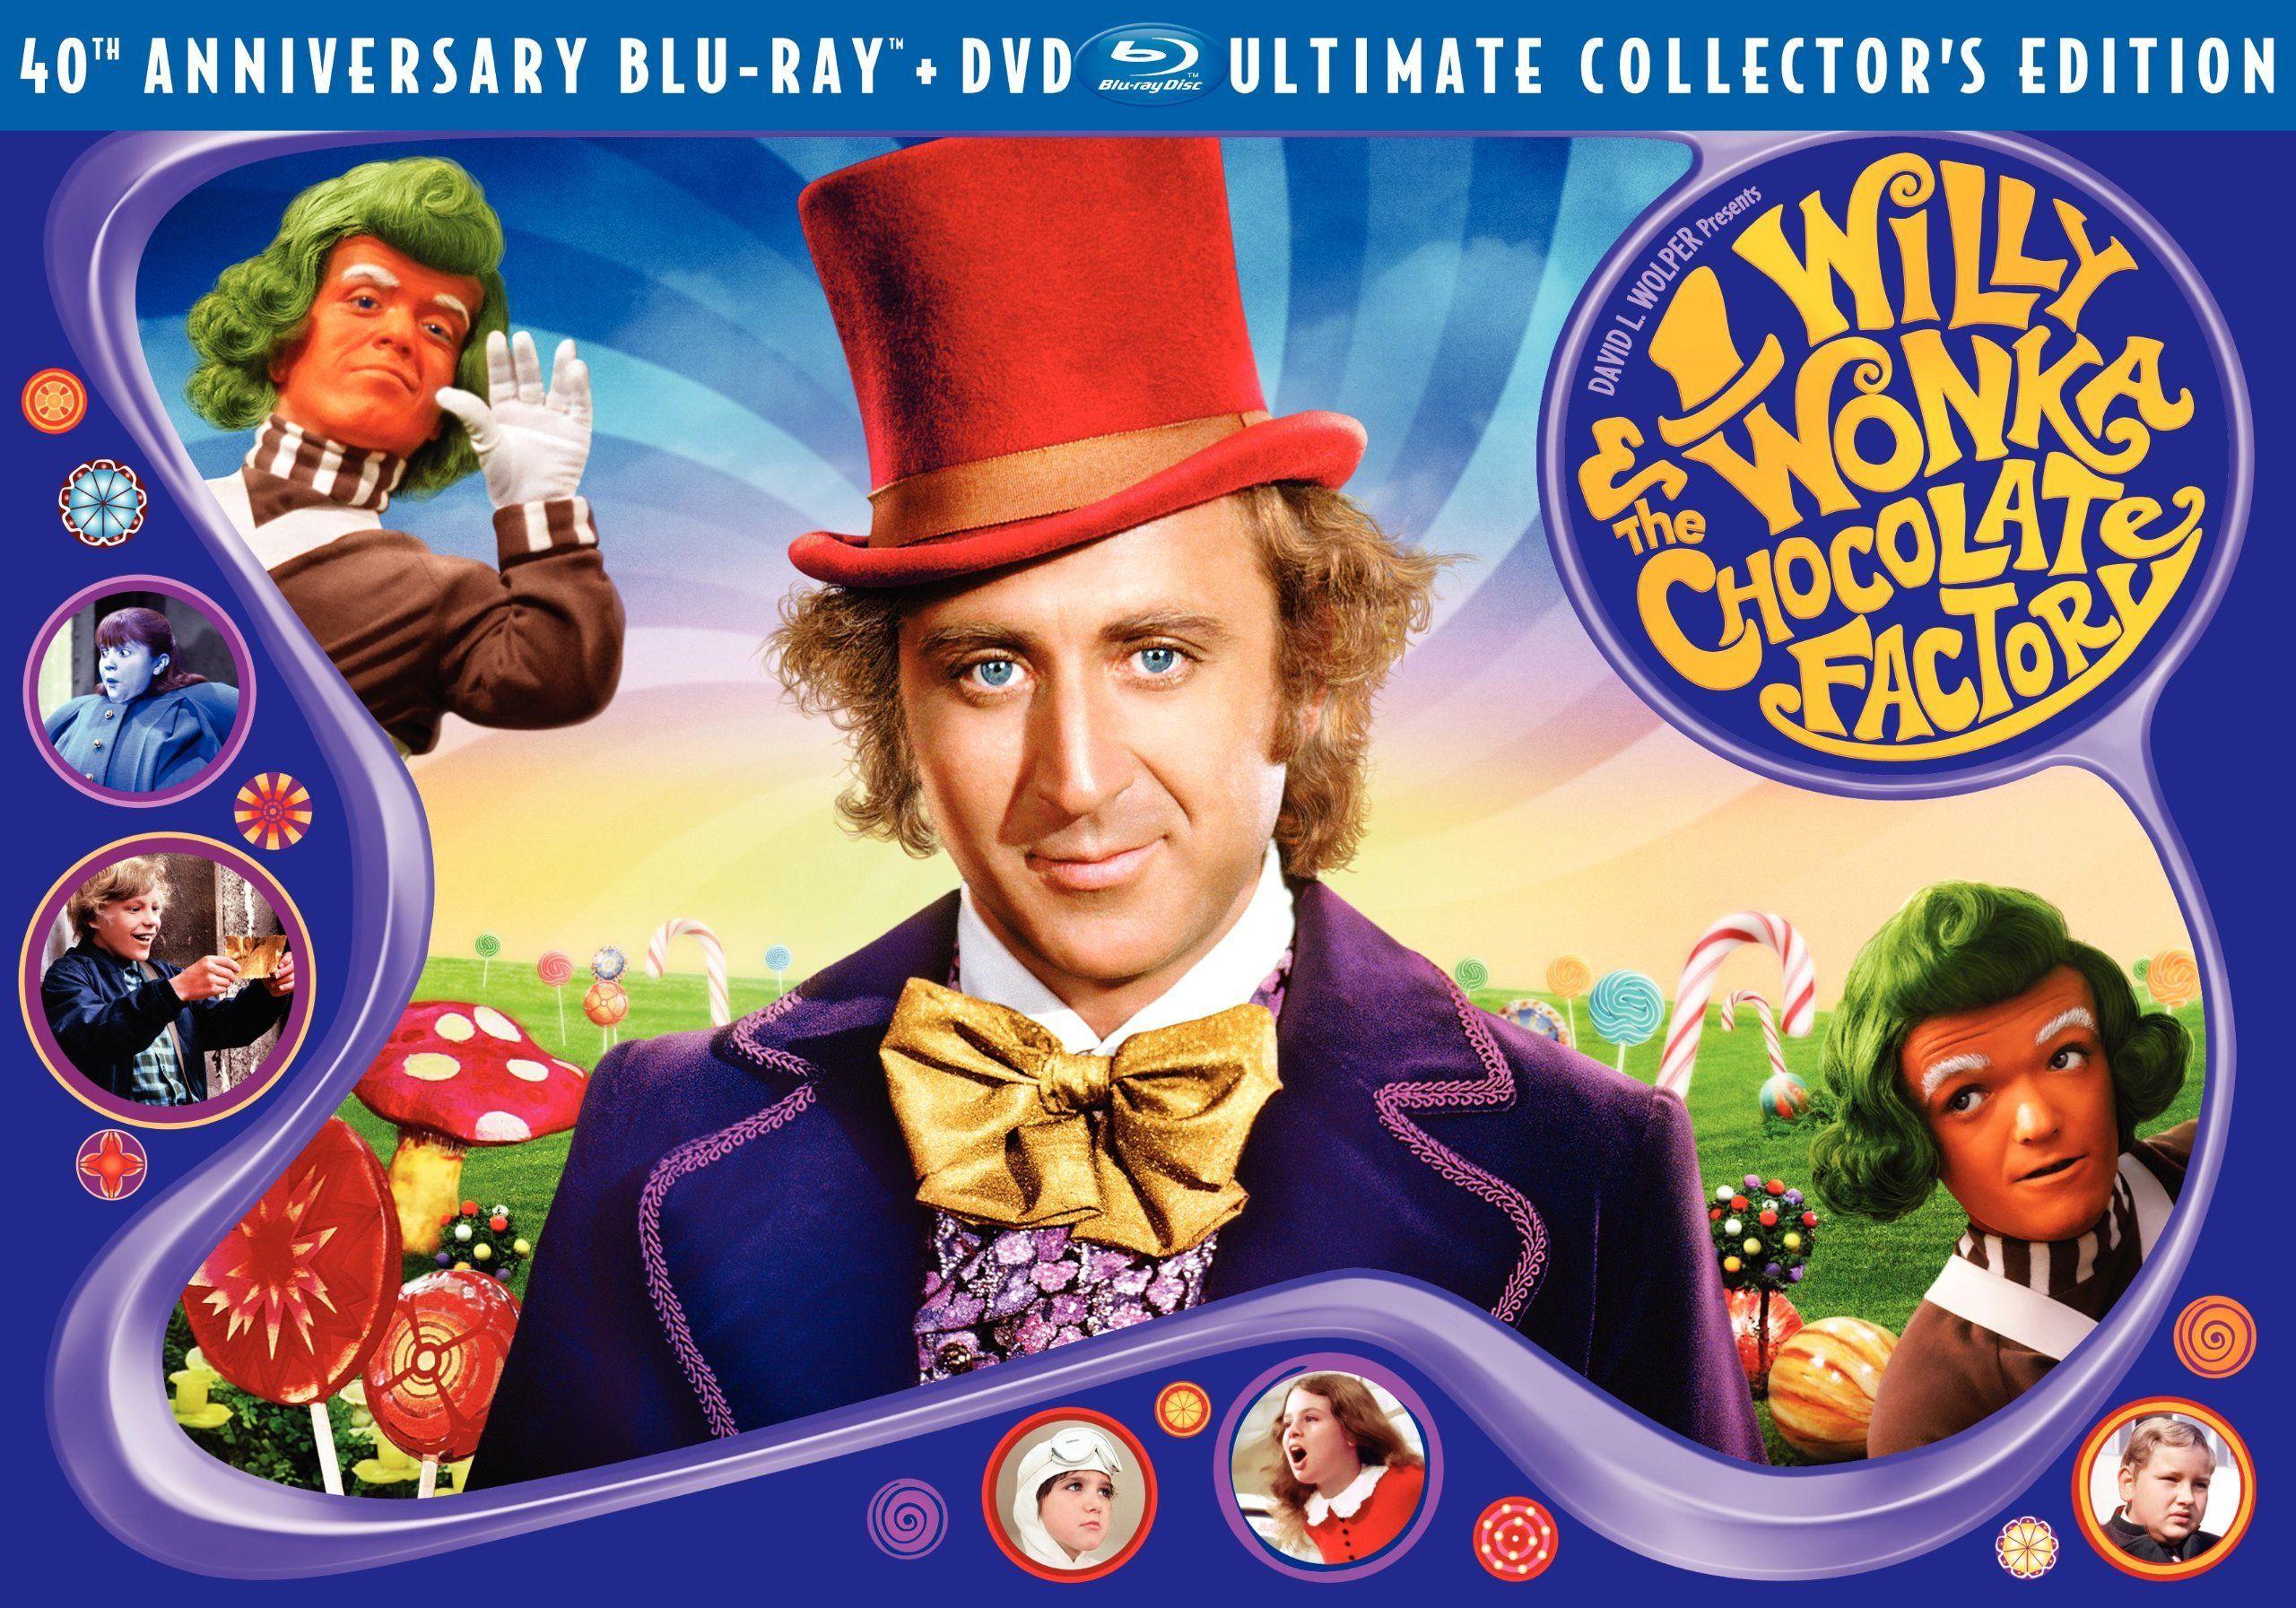 WILLY WONKA Chocolate Factory charlie adventure family comedy